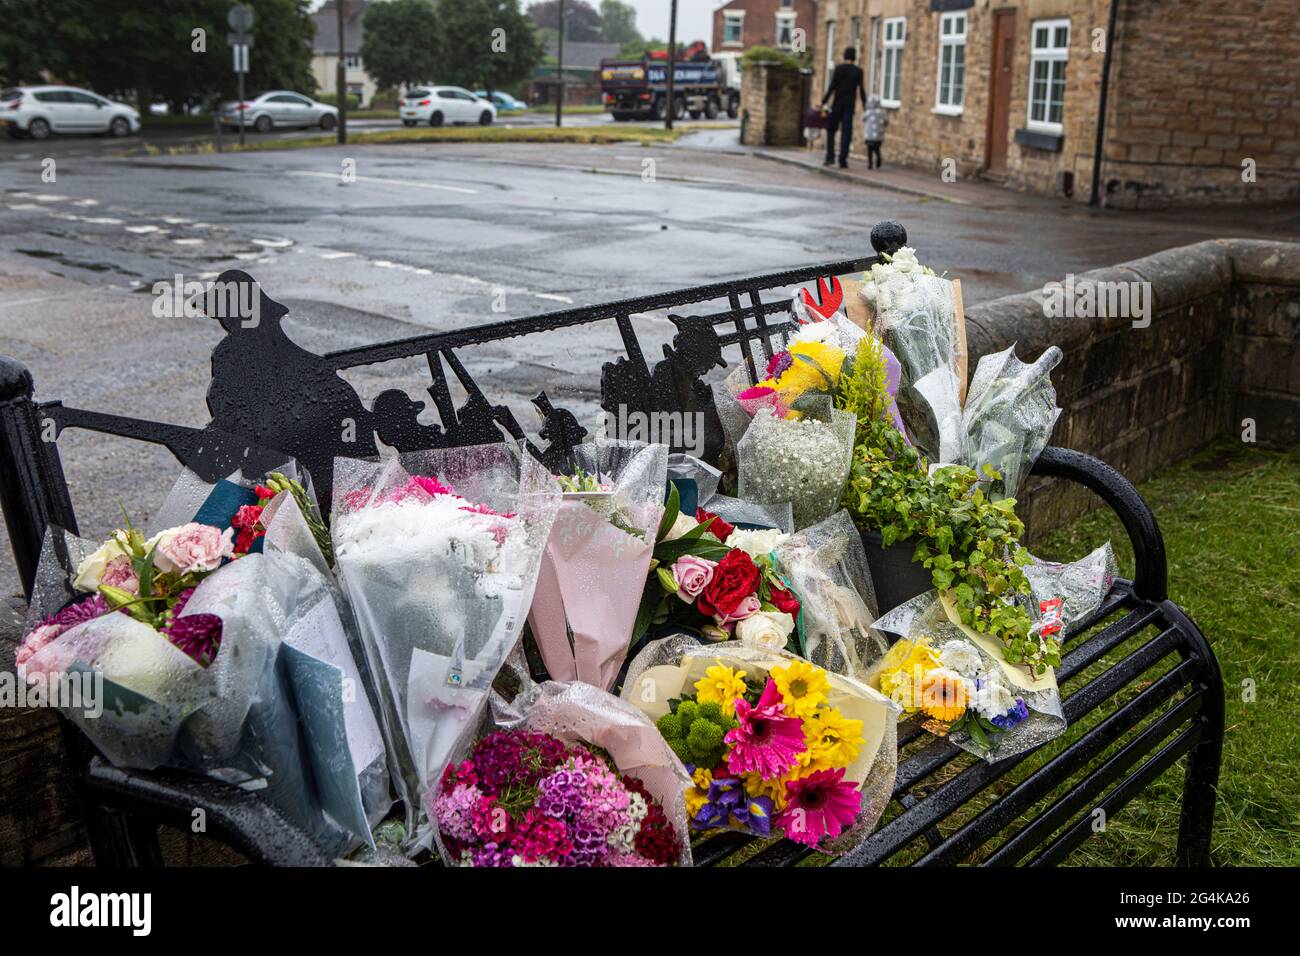 The Murder of Gracie Spinks.  Flowers left on in the Garden of remebrance of Gracie Spinks home town of Old Whittington, Derbyshire. Stock Photo